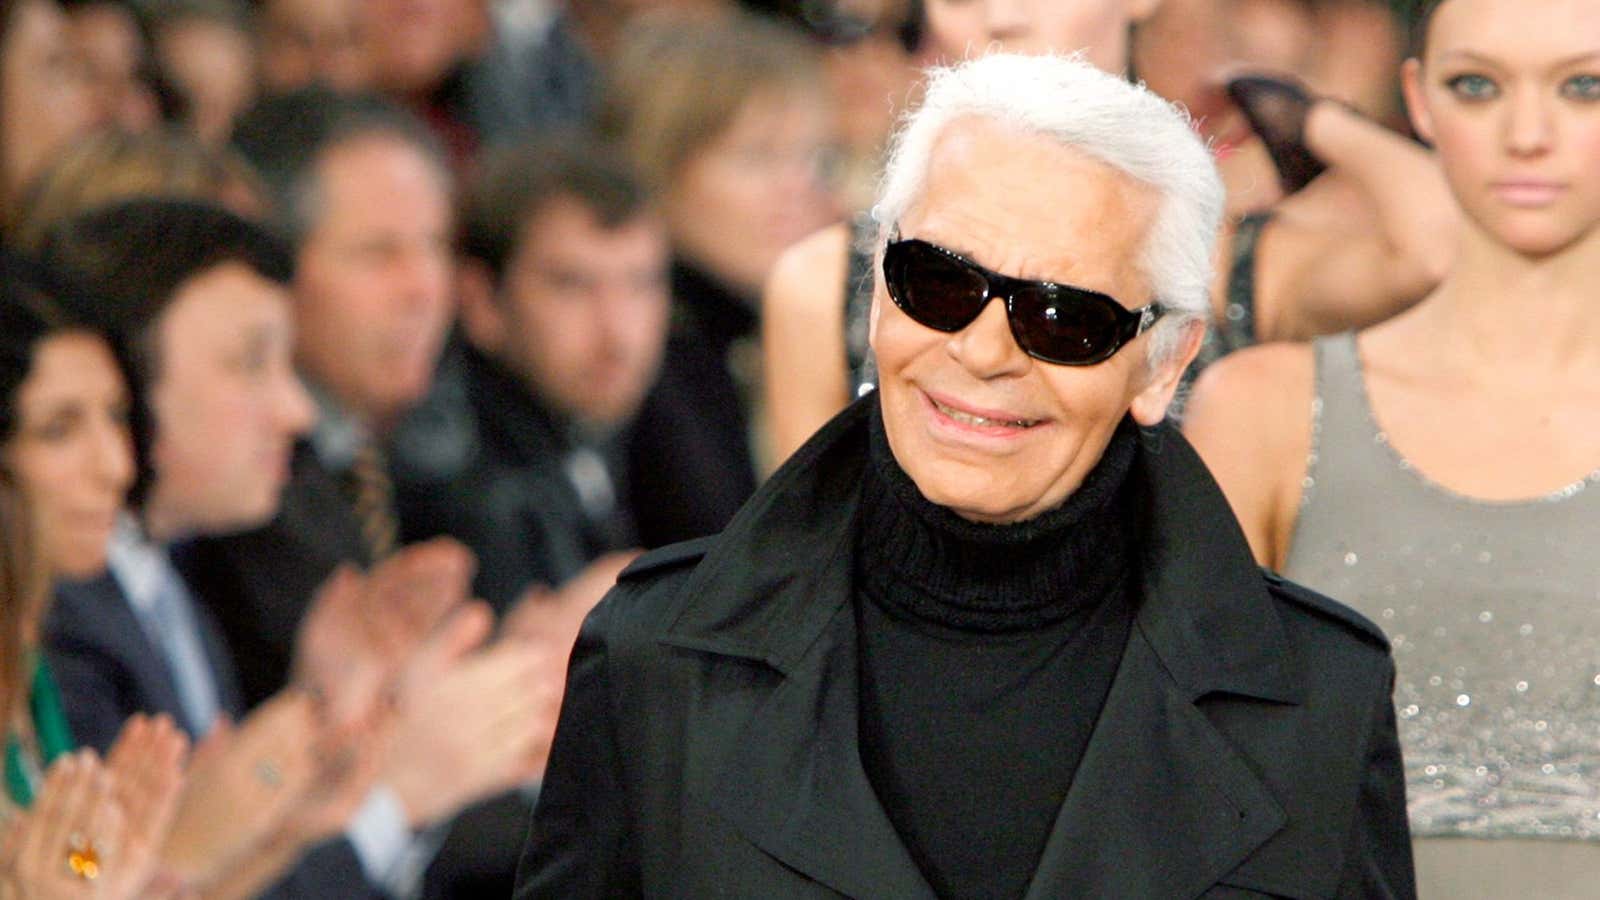 Remember Karl Lagerfeld as a designer, but also as a comedian